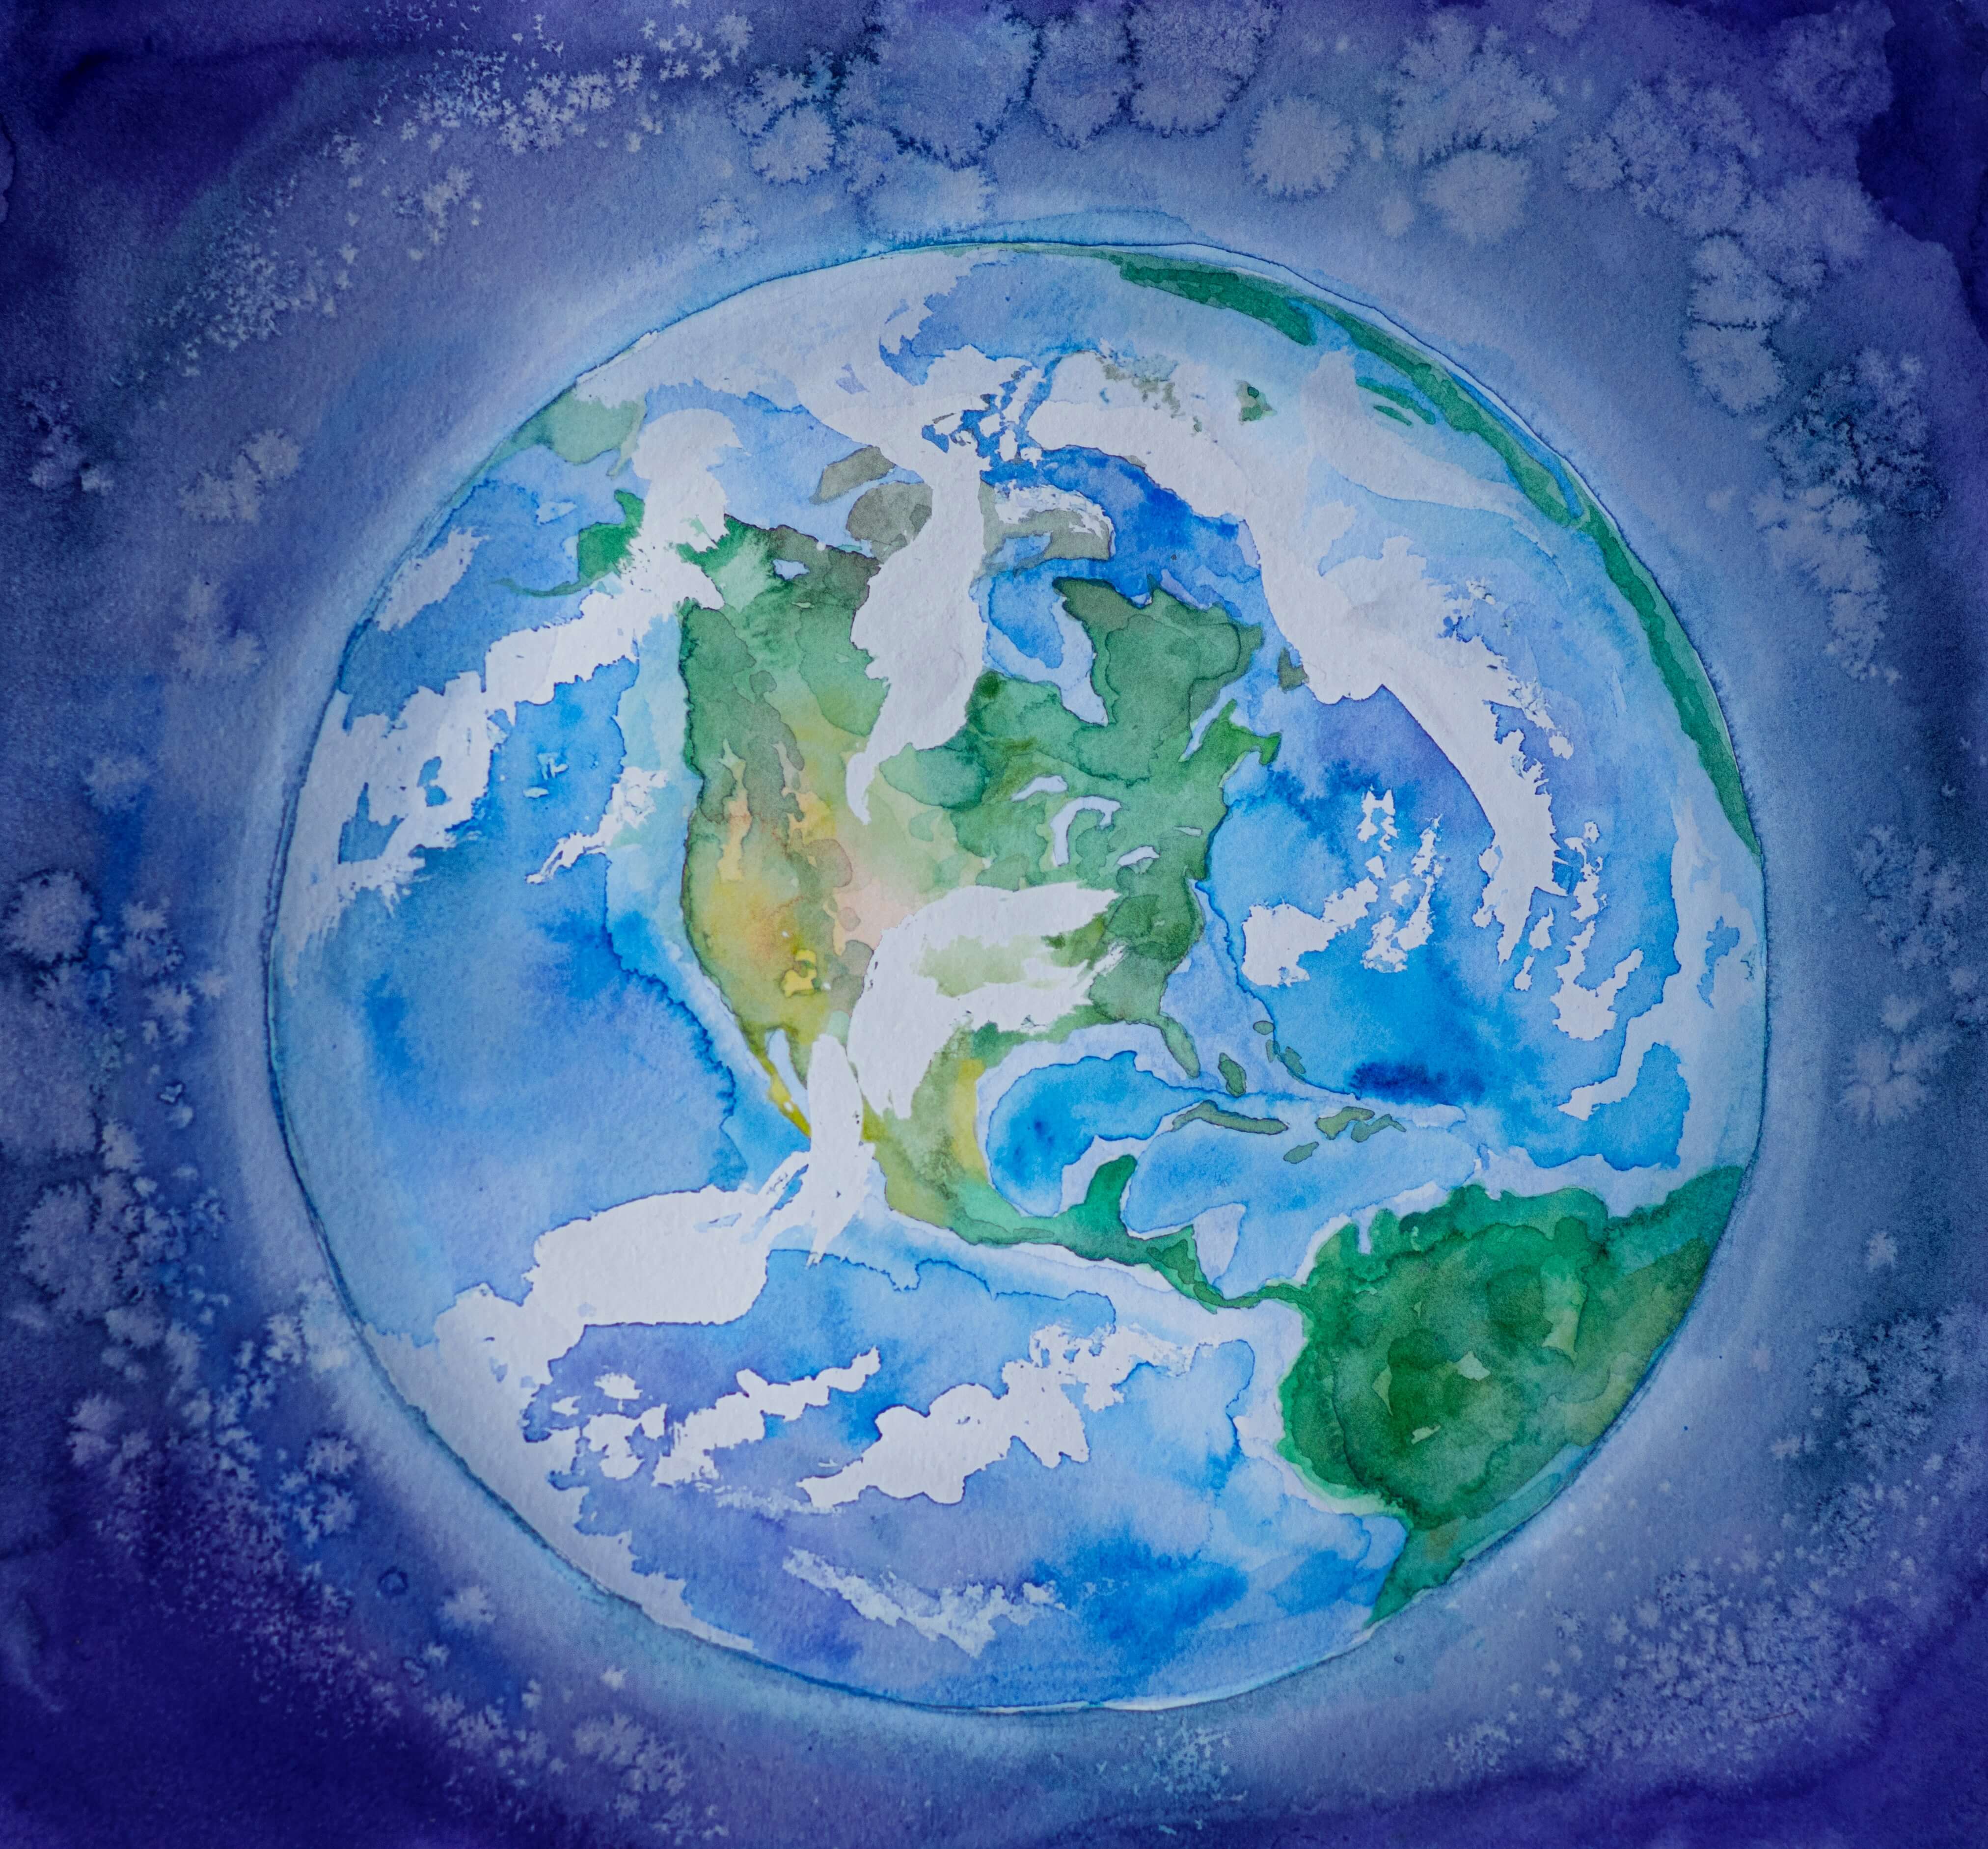 Watercolor art of the Earth